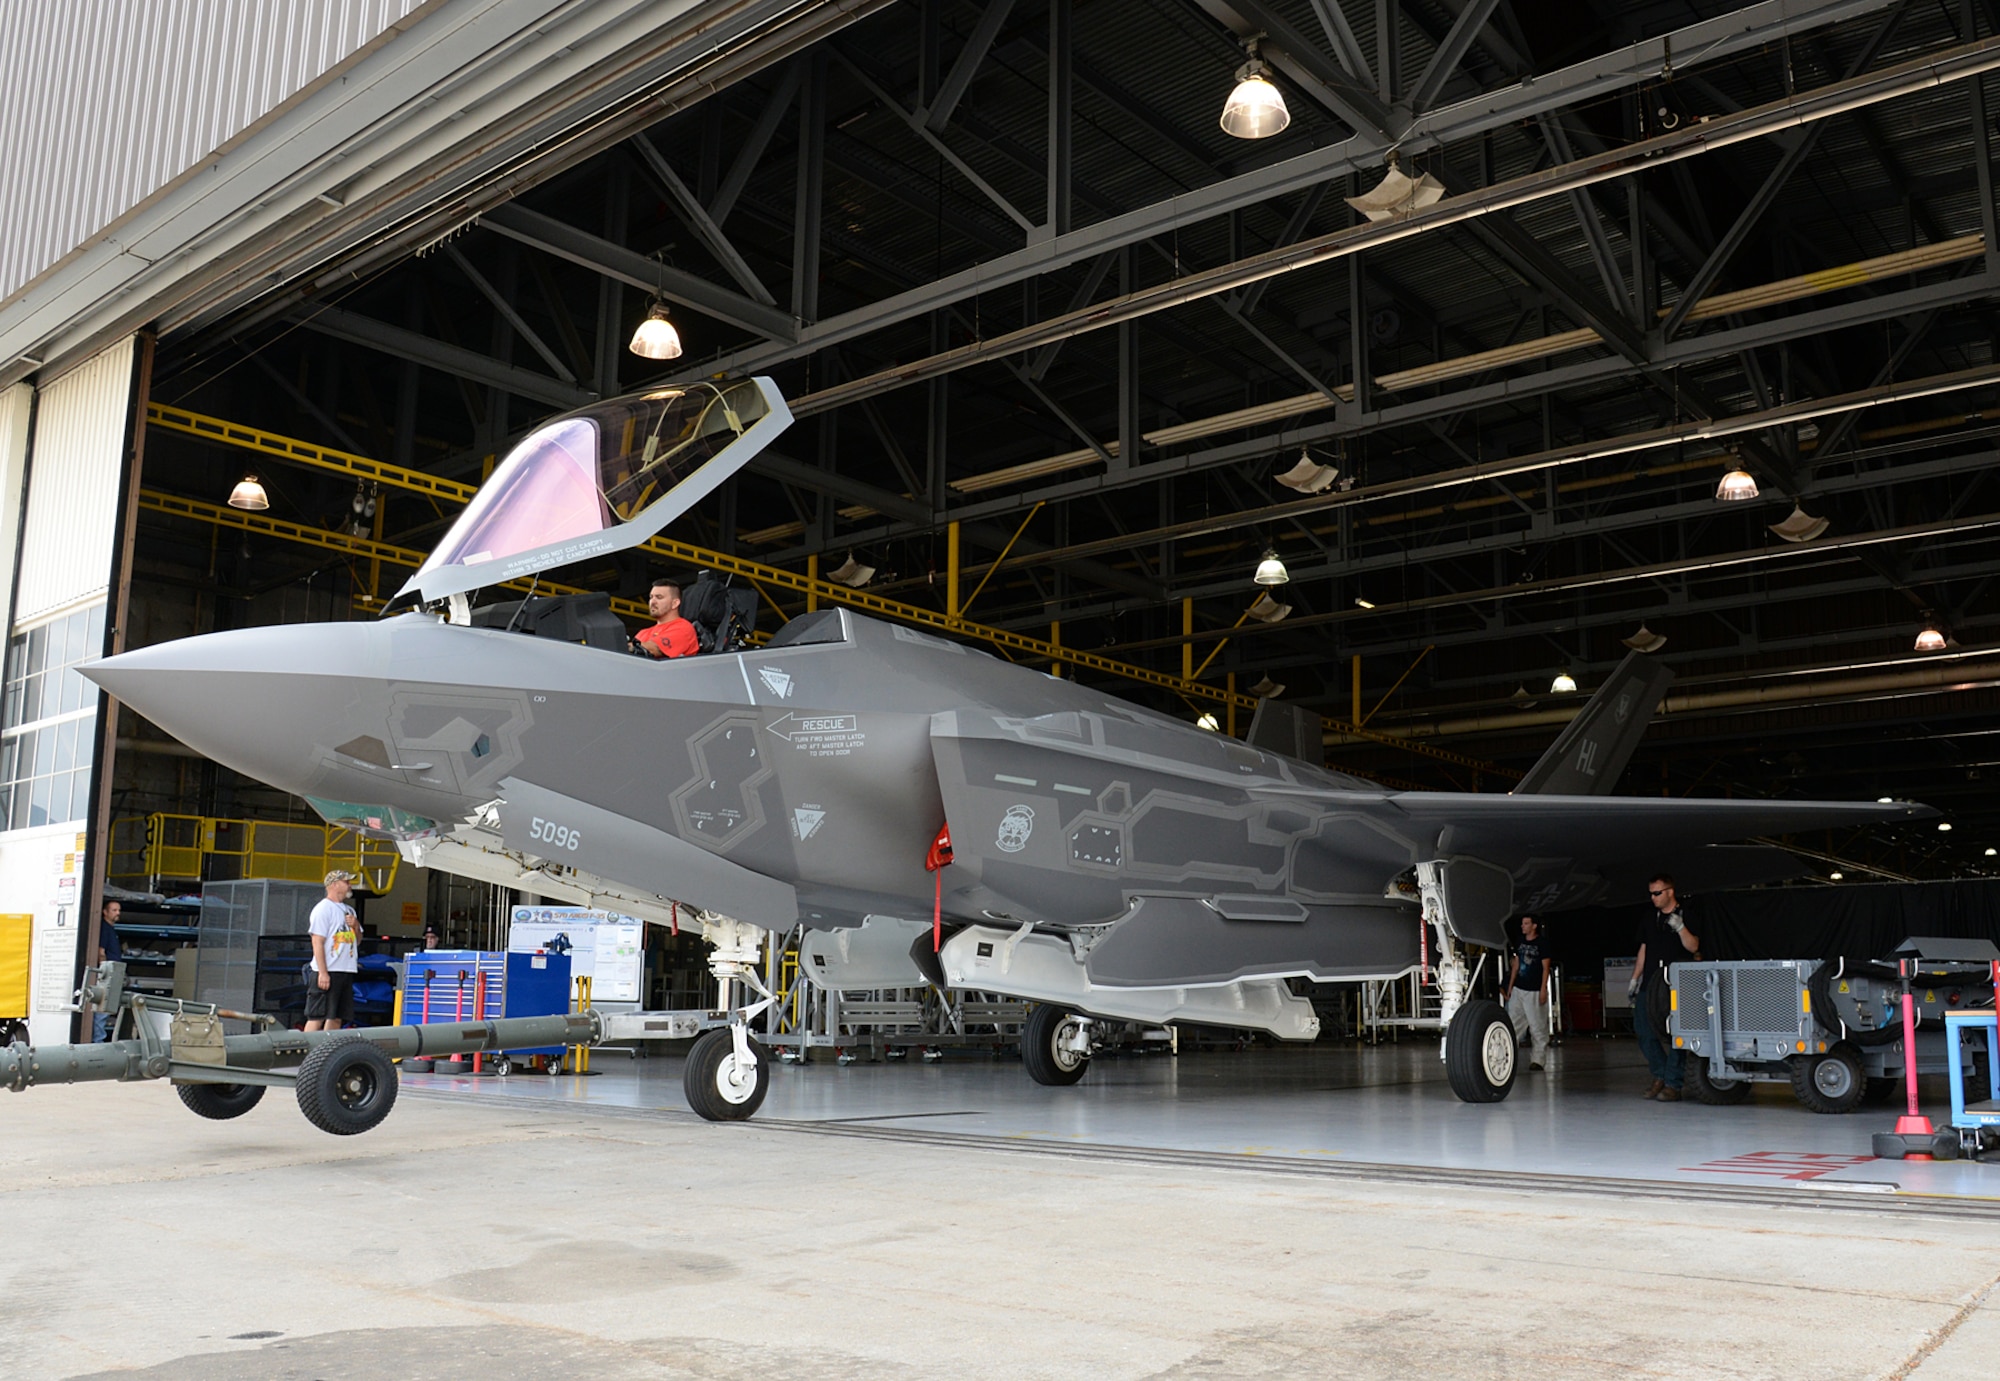 The 12th F-35A Lightning II assigned to the active duty 388th Fighter Wing and Reserve 419th Fighter Wing is towed from a hangar at Hill Air Force Base, Utah. Hill's Ogden Air Logistics Complex recently completed modifications on the aircraft, which will give the fighter wings the minimum number of aircraft required to reach “initial operational capability,” or combat readiness. (U.S. Air Force photo by Alex R. Lloyd)